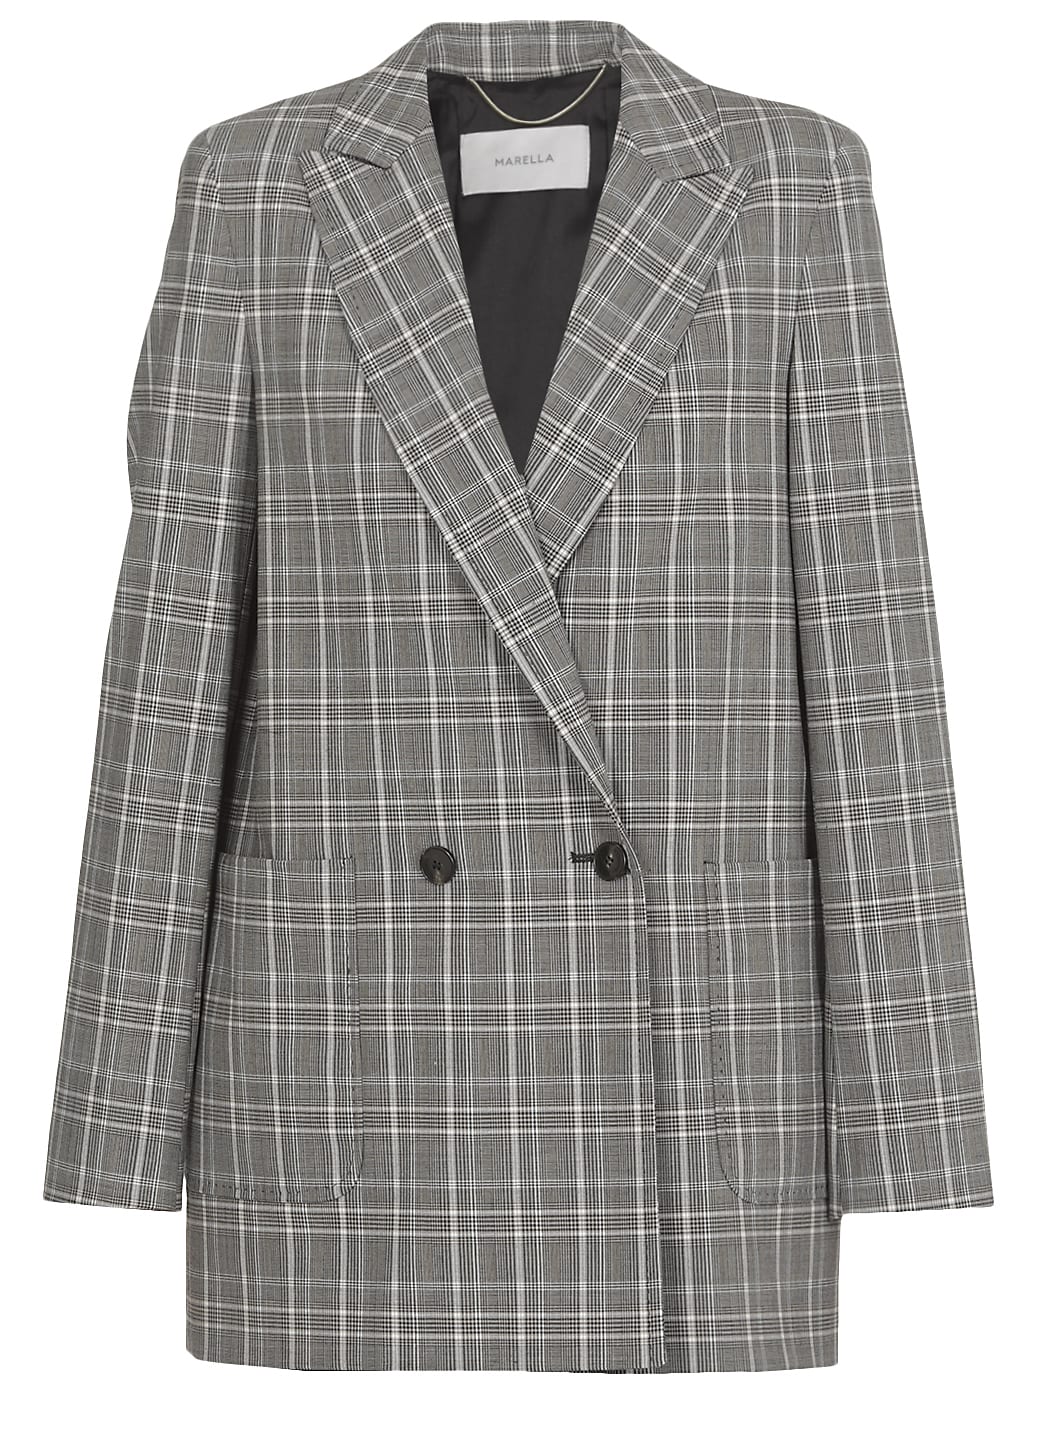 Marella Double Breasted Jacket